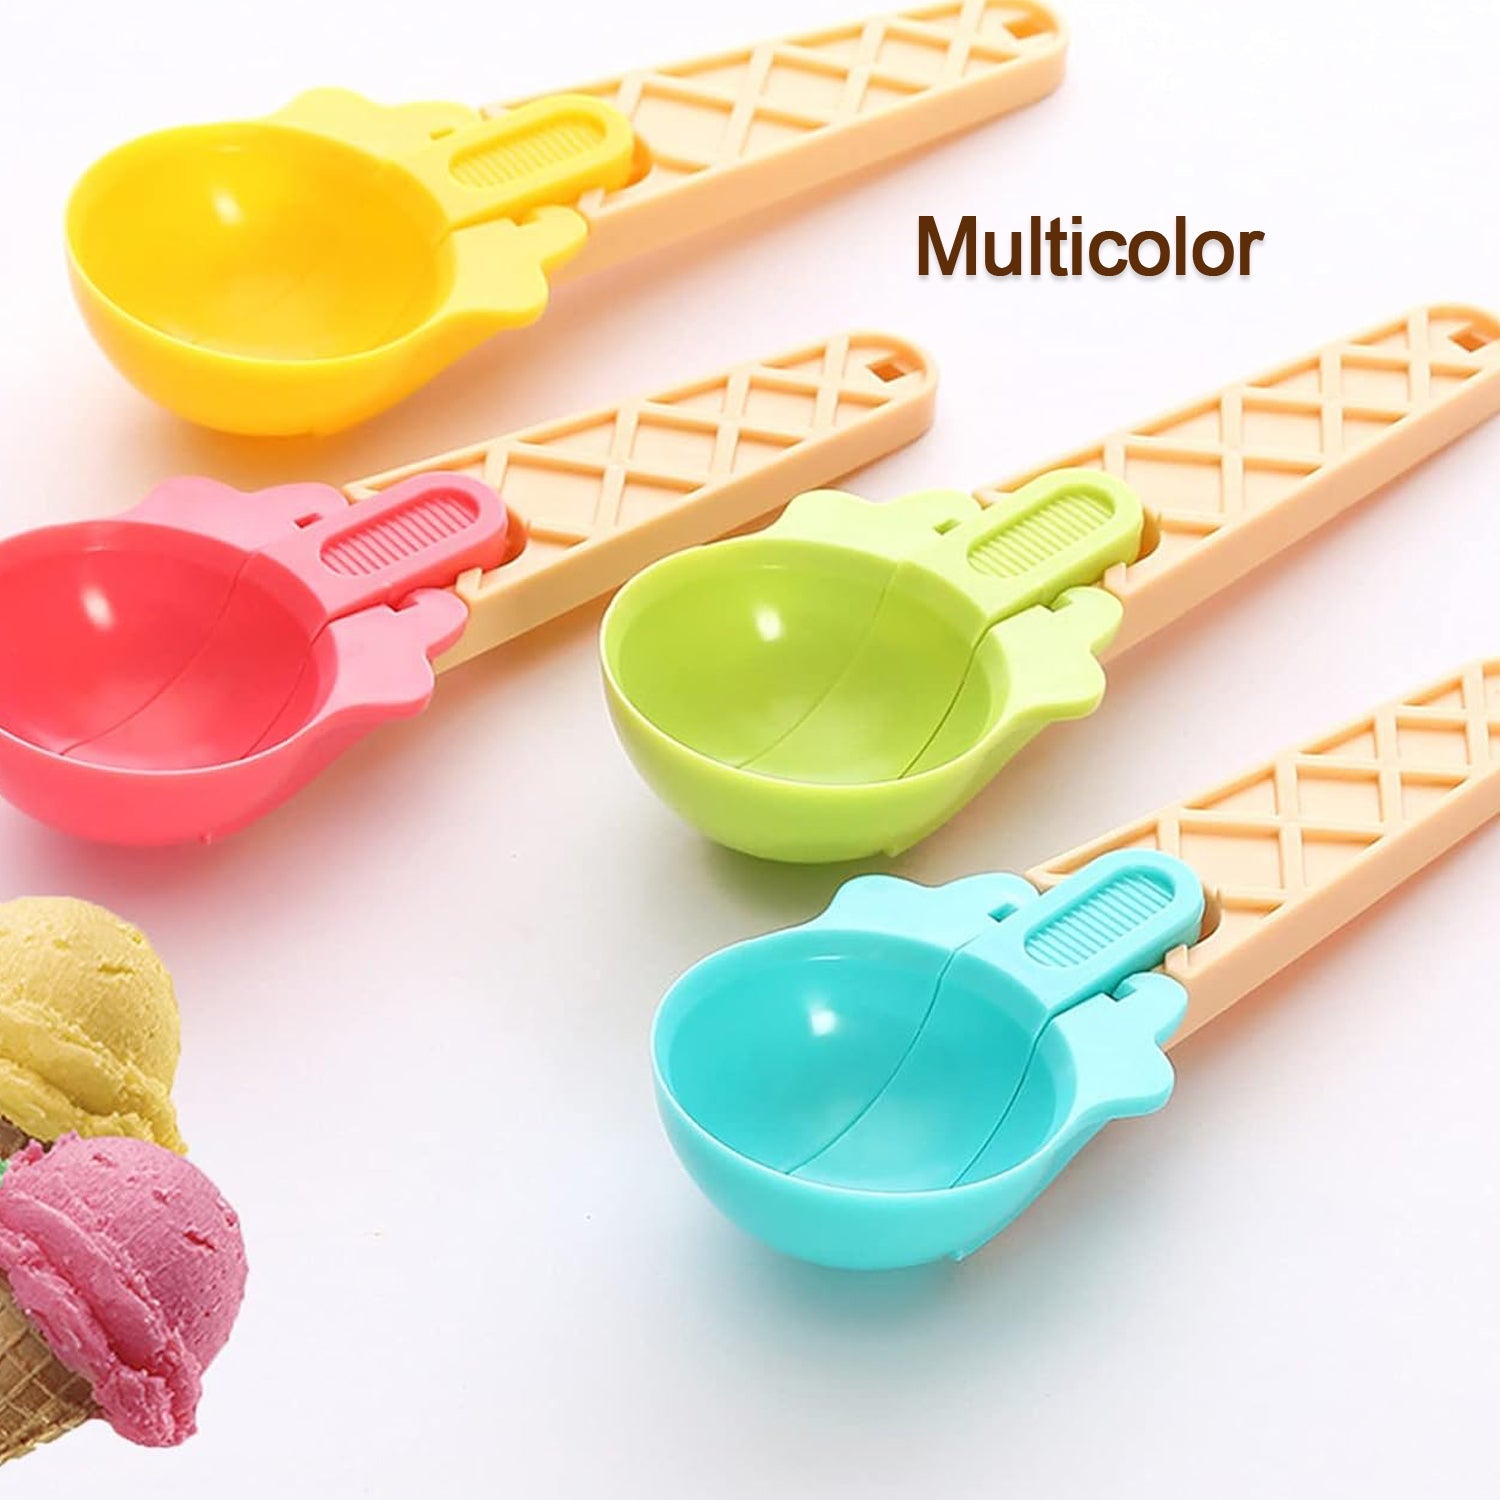 5509 Ice Cream Spoons 2pcs Plastic Water Melon Scoopers with Trigger Dipper and Adults for Summer Party Ice Cream Scoop, Food Serving Spoon Kitchen Tools Ice Cream Digging Spoon Household Spoons Cupcake Spoons Aps Fruit Ball Player (2 Pc)